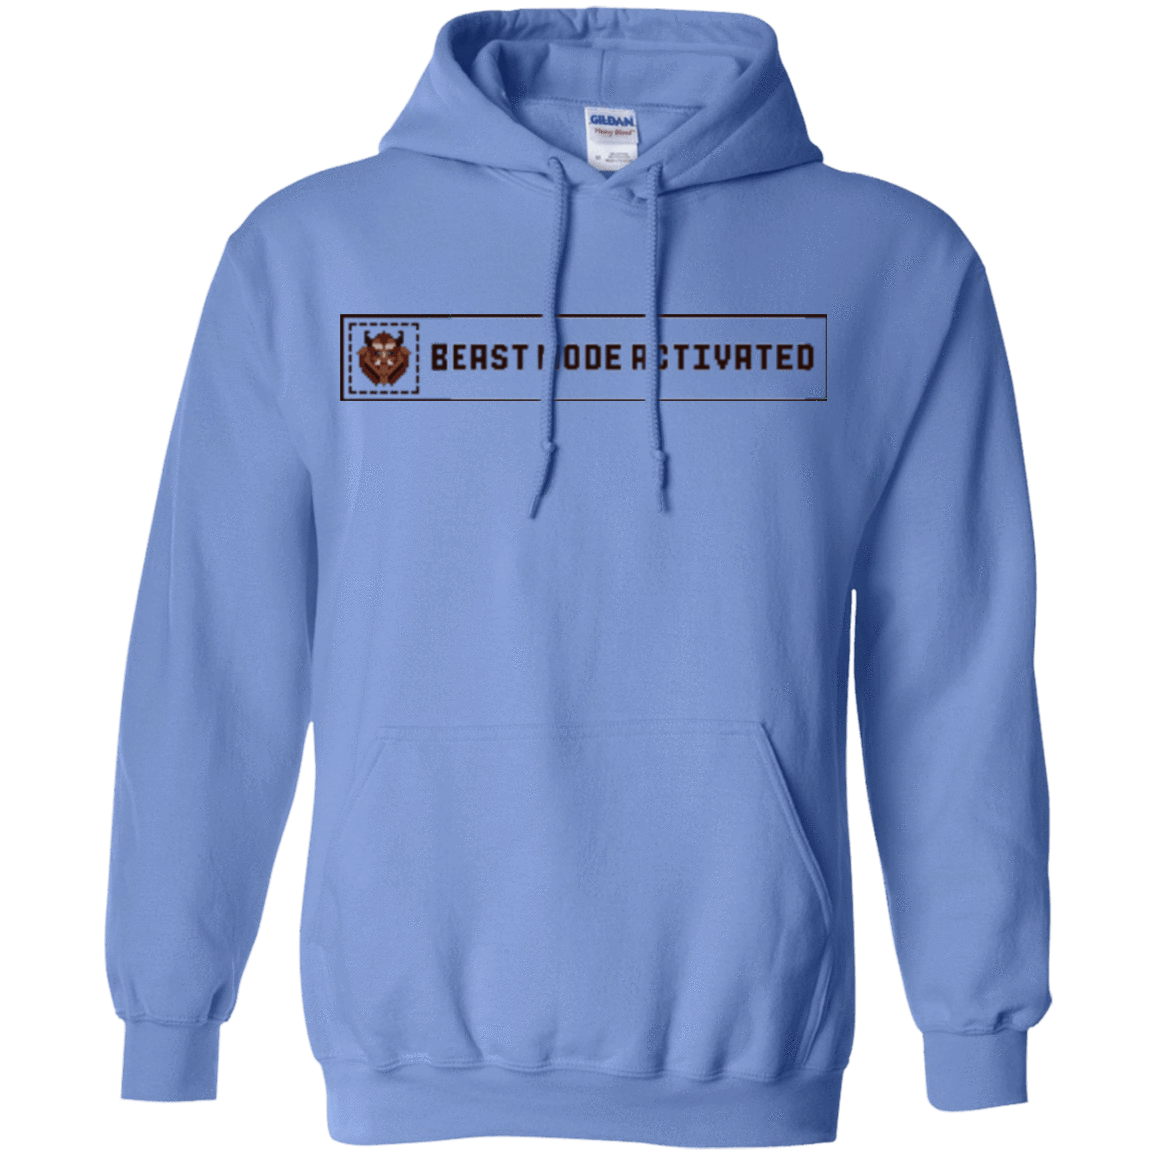 Sweatshirts Carolina Blue / Small Beast Mode Activated Pullover Hoodie